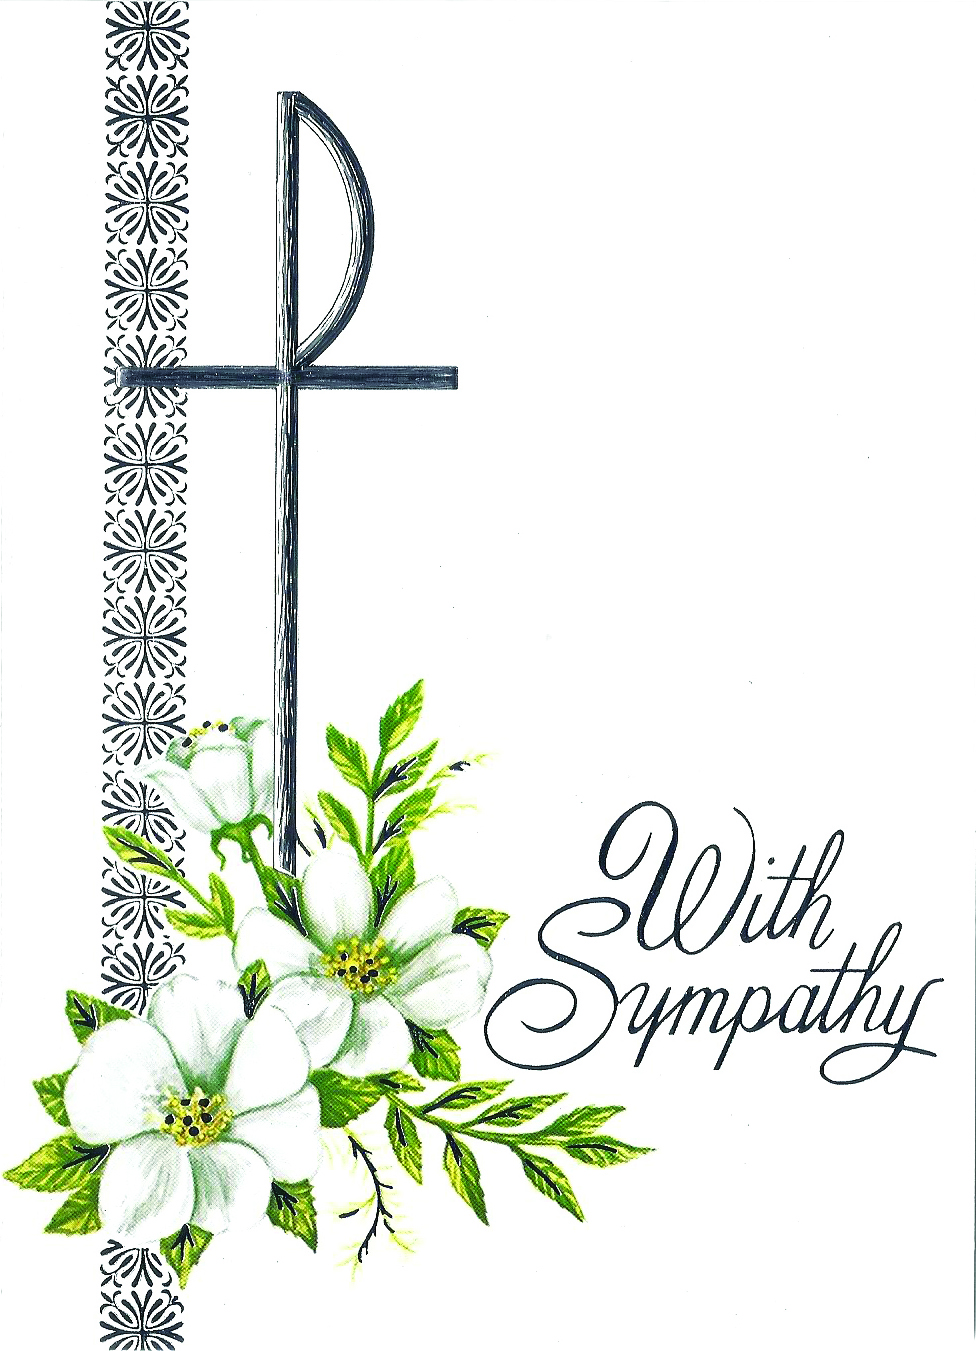 cards clipart sympathy